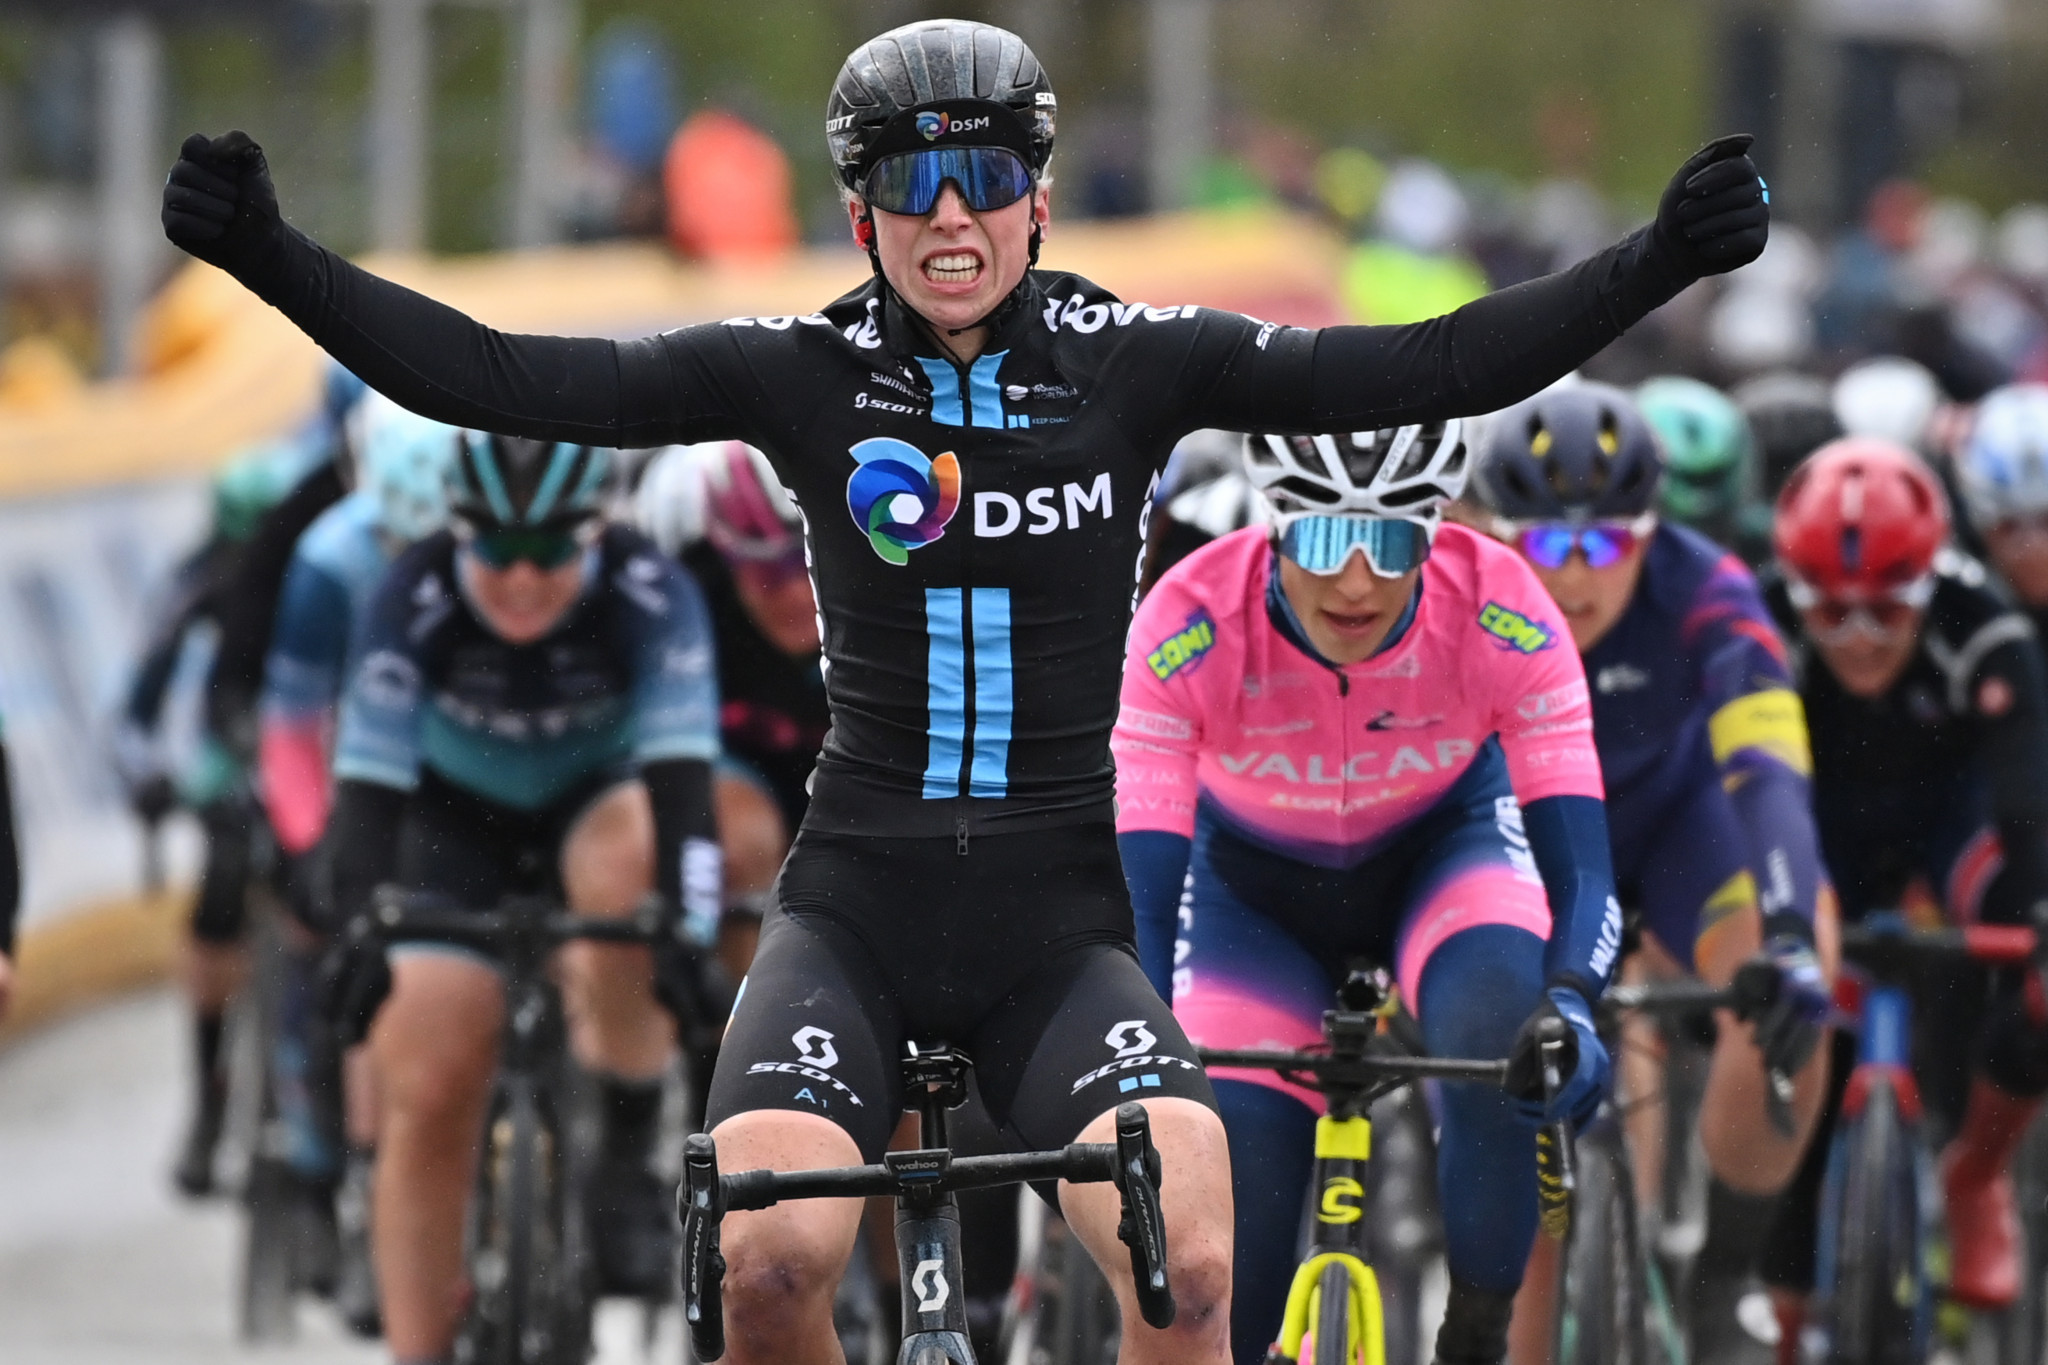 Wiebes secures back-to-back wins at Women’s Tour in Gloucester